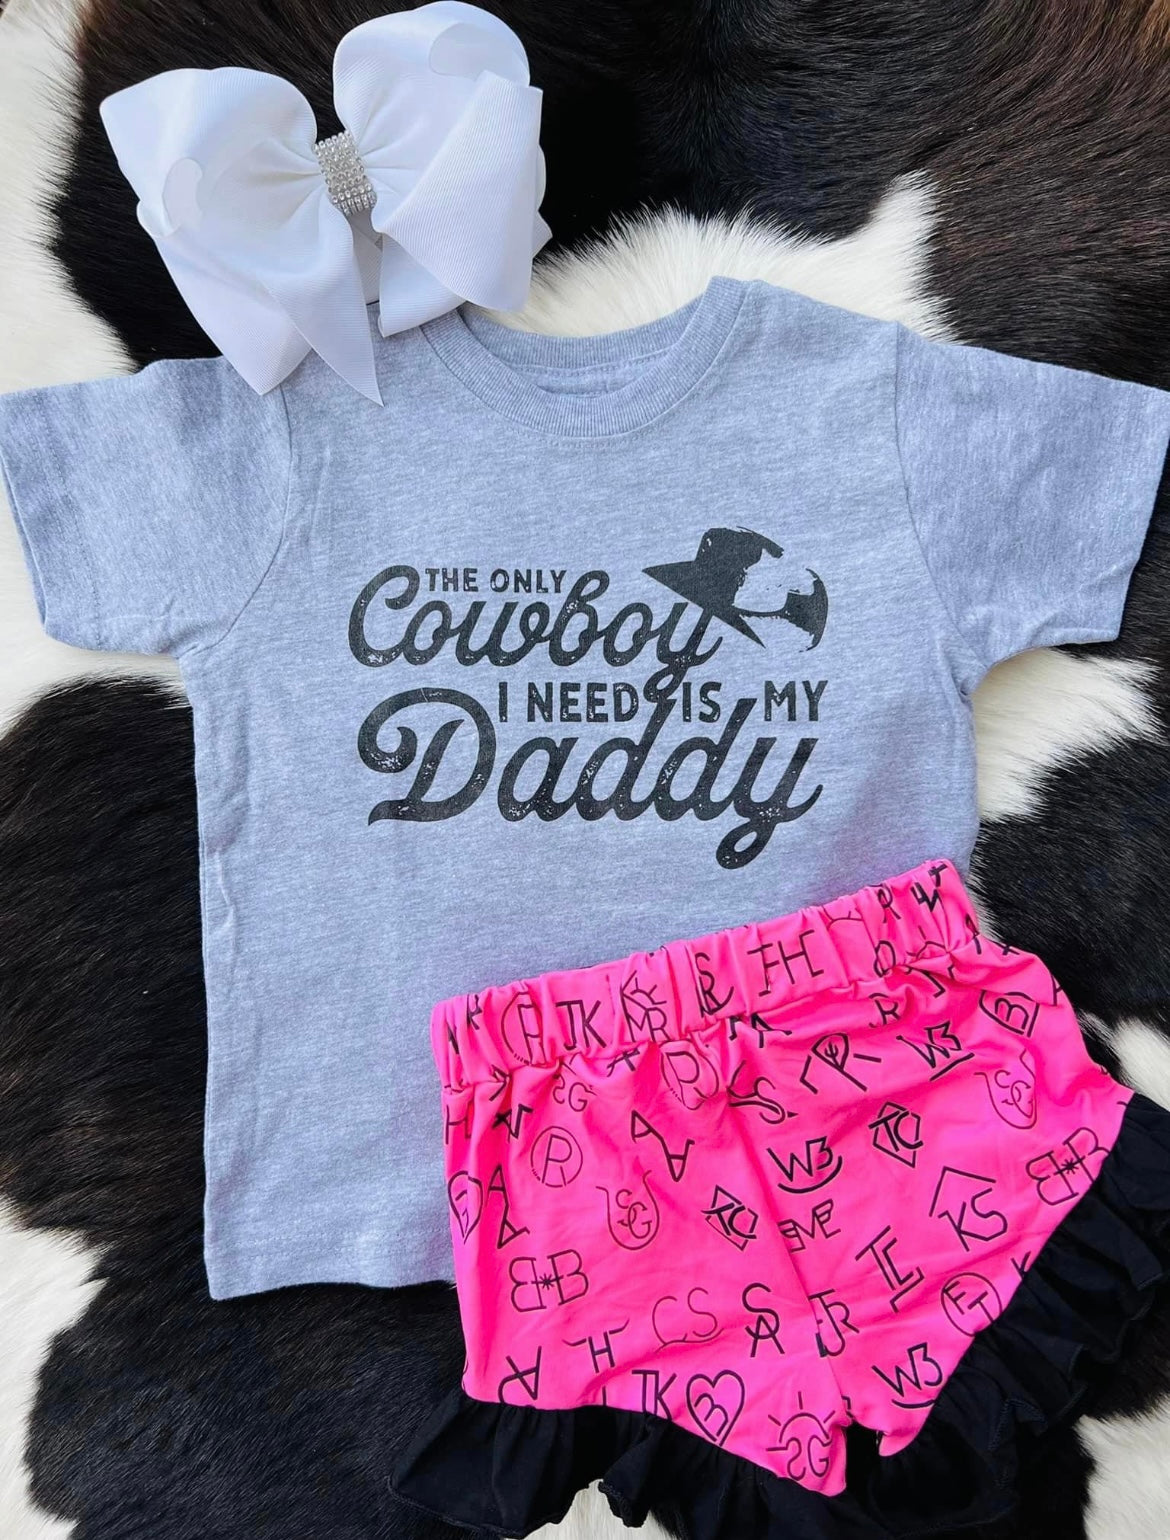 The only cowboy I need Kids tee